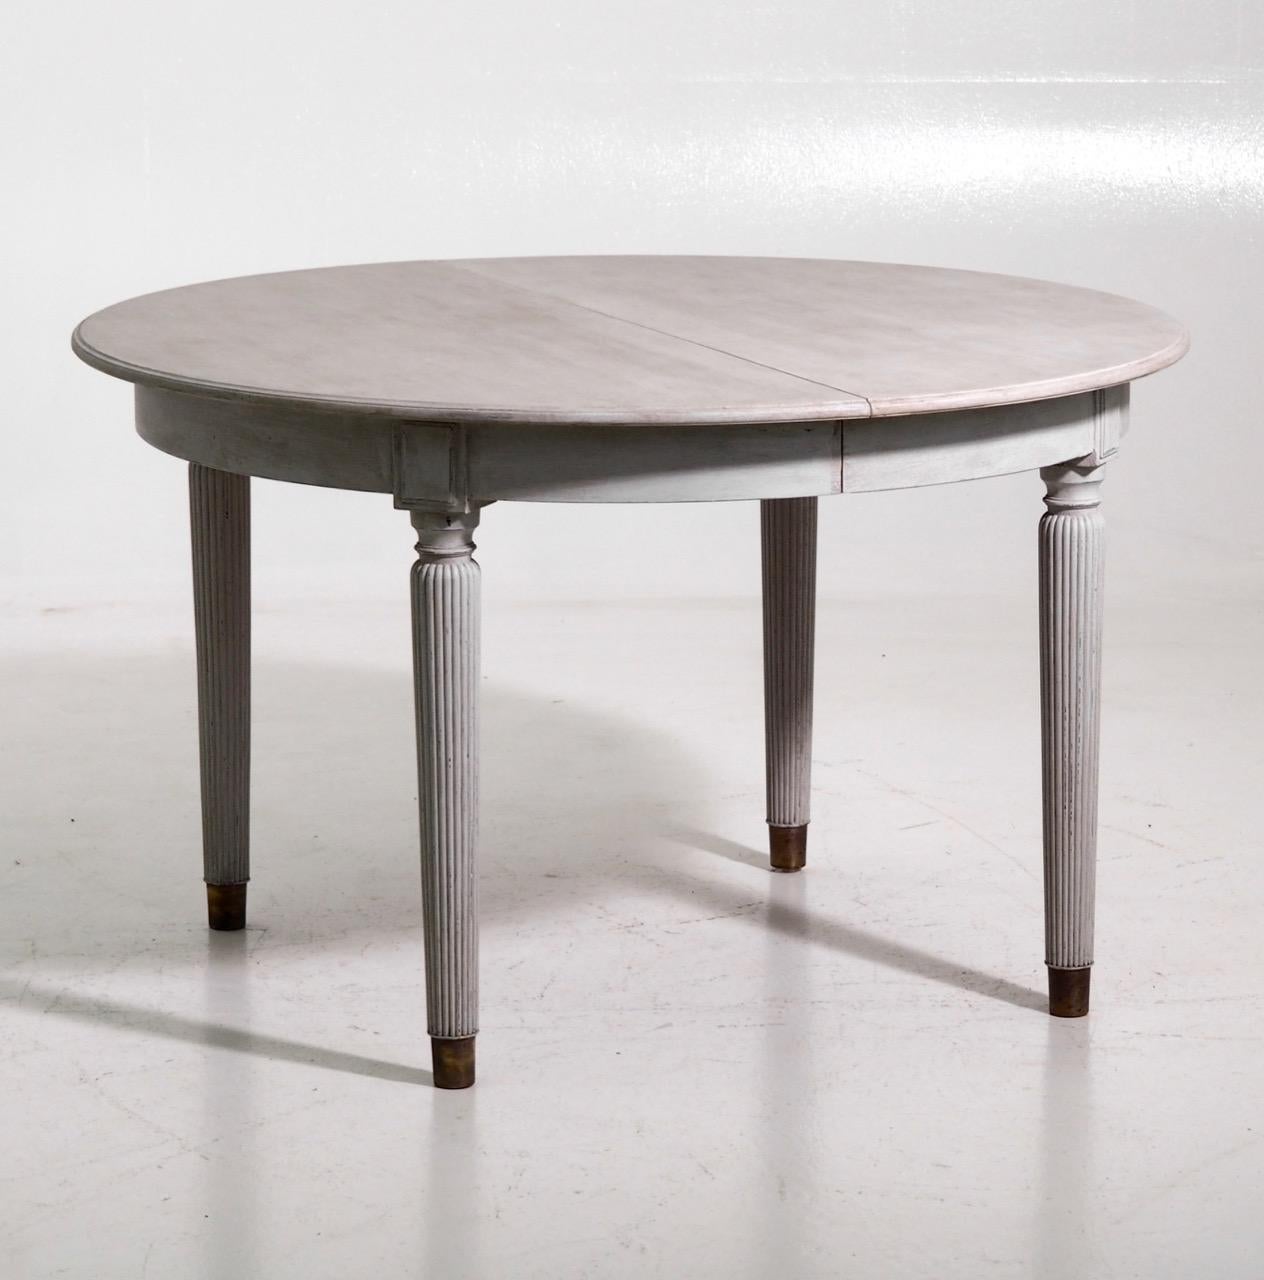 Gustavian extension table with three leaves, with mounted bronze feet and fine carvings on the legs, 20th century.